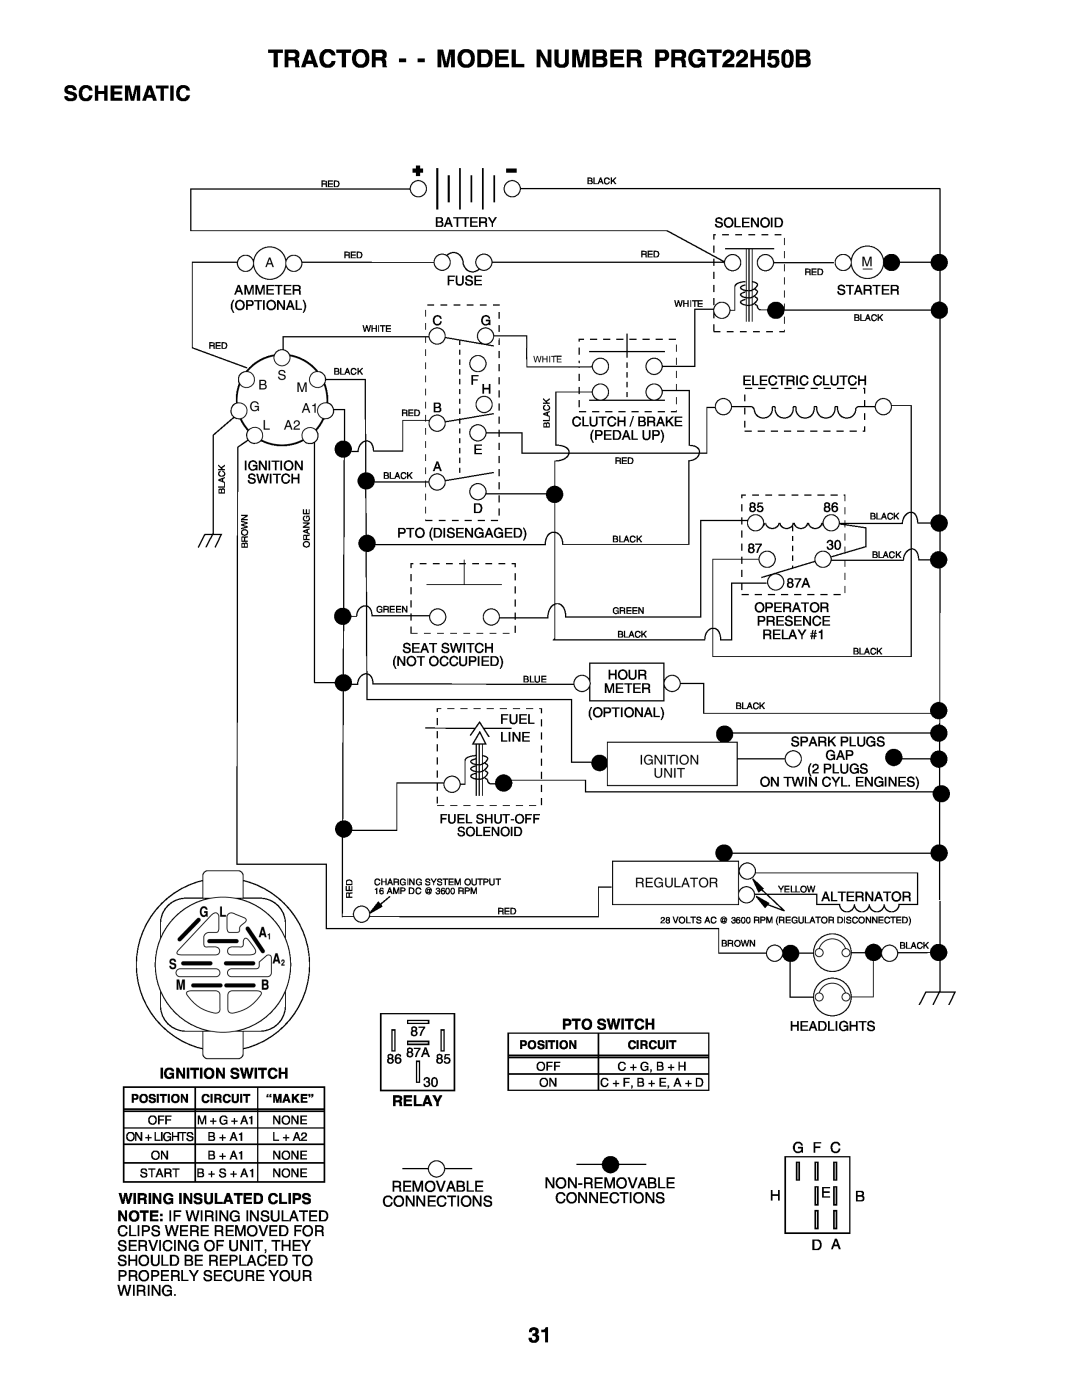 Poulan owner manual TRACTOR - - MODEL NUMBER PRGT22H50B, Schematic 